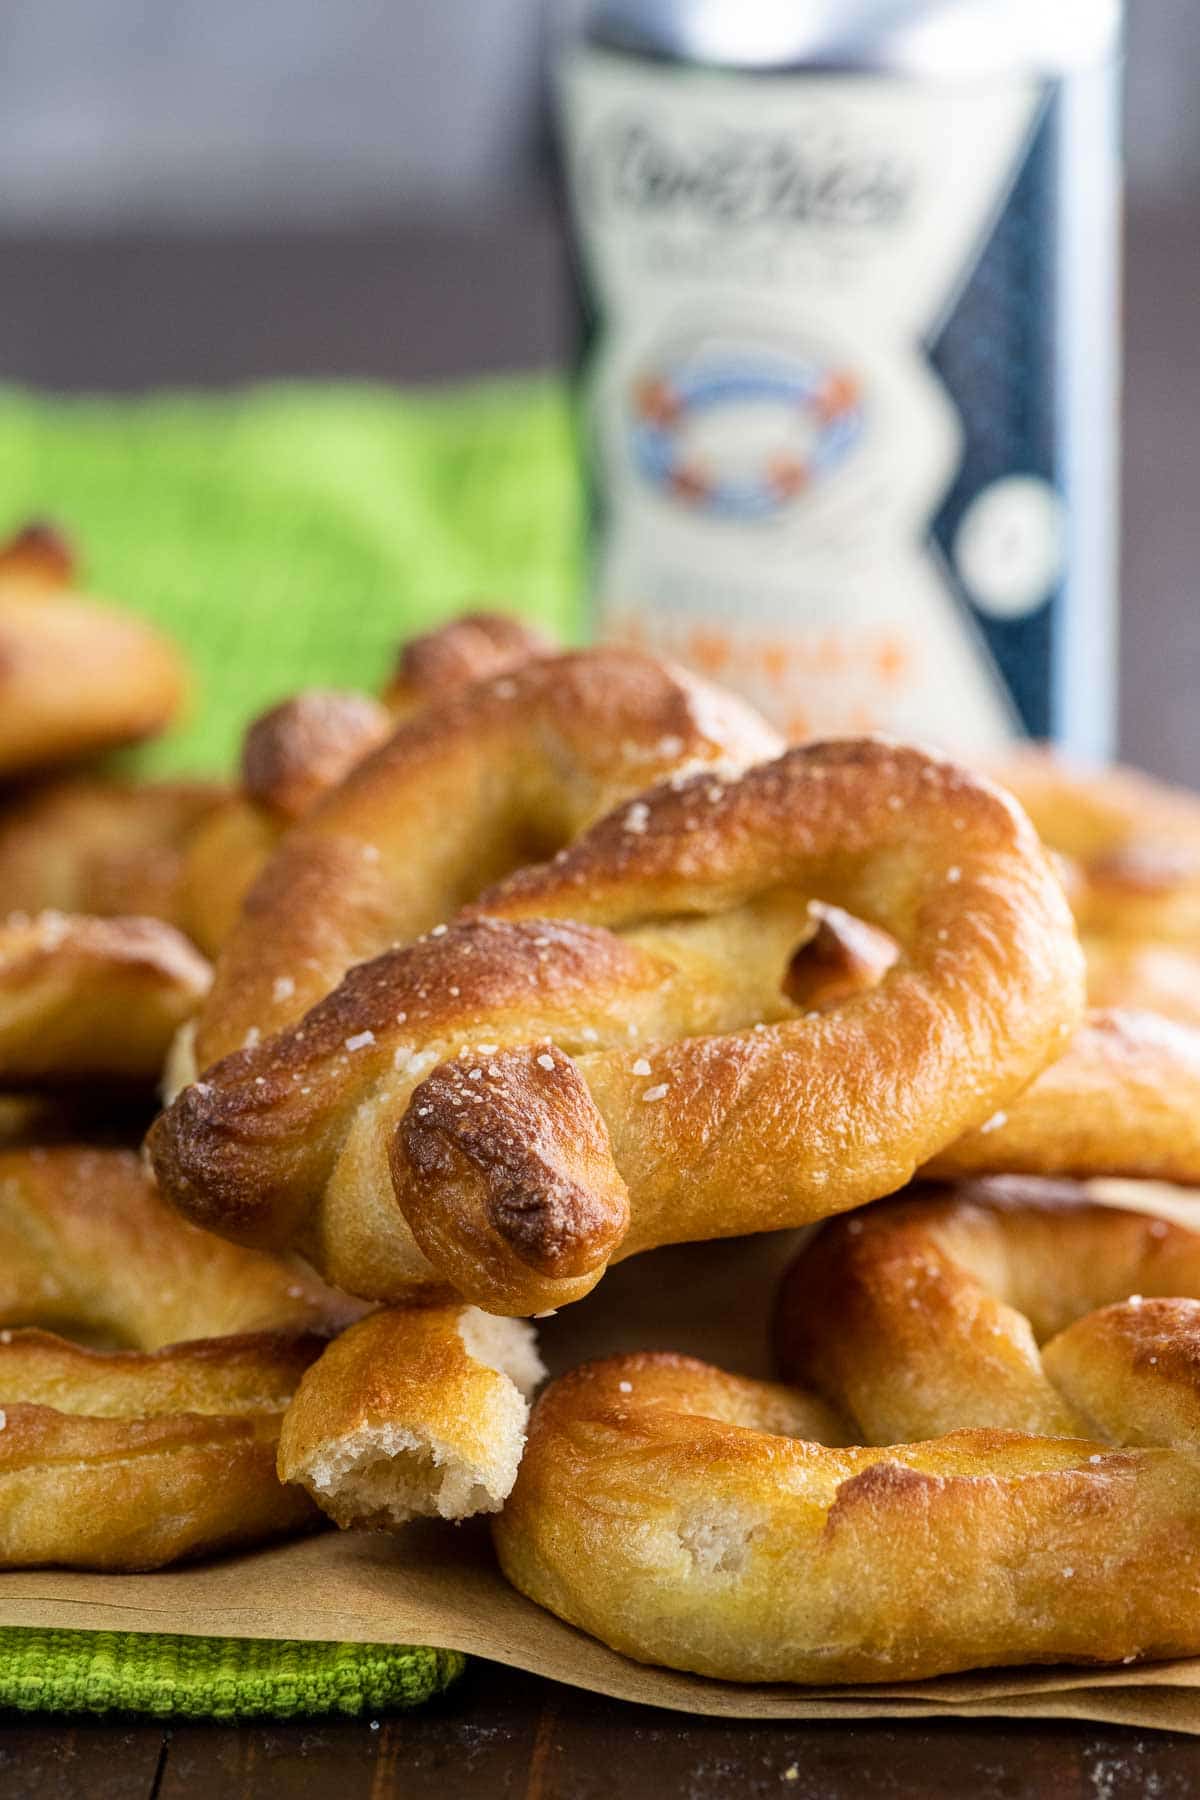 a big pile of vegan soft pretzels on a table with mustard and beer